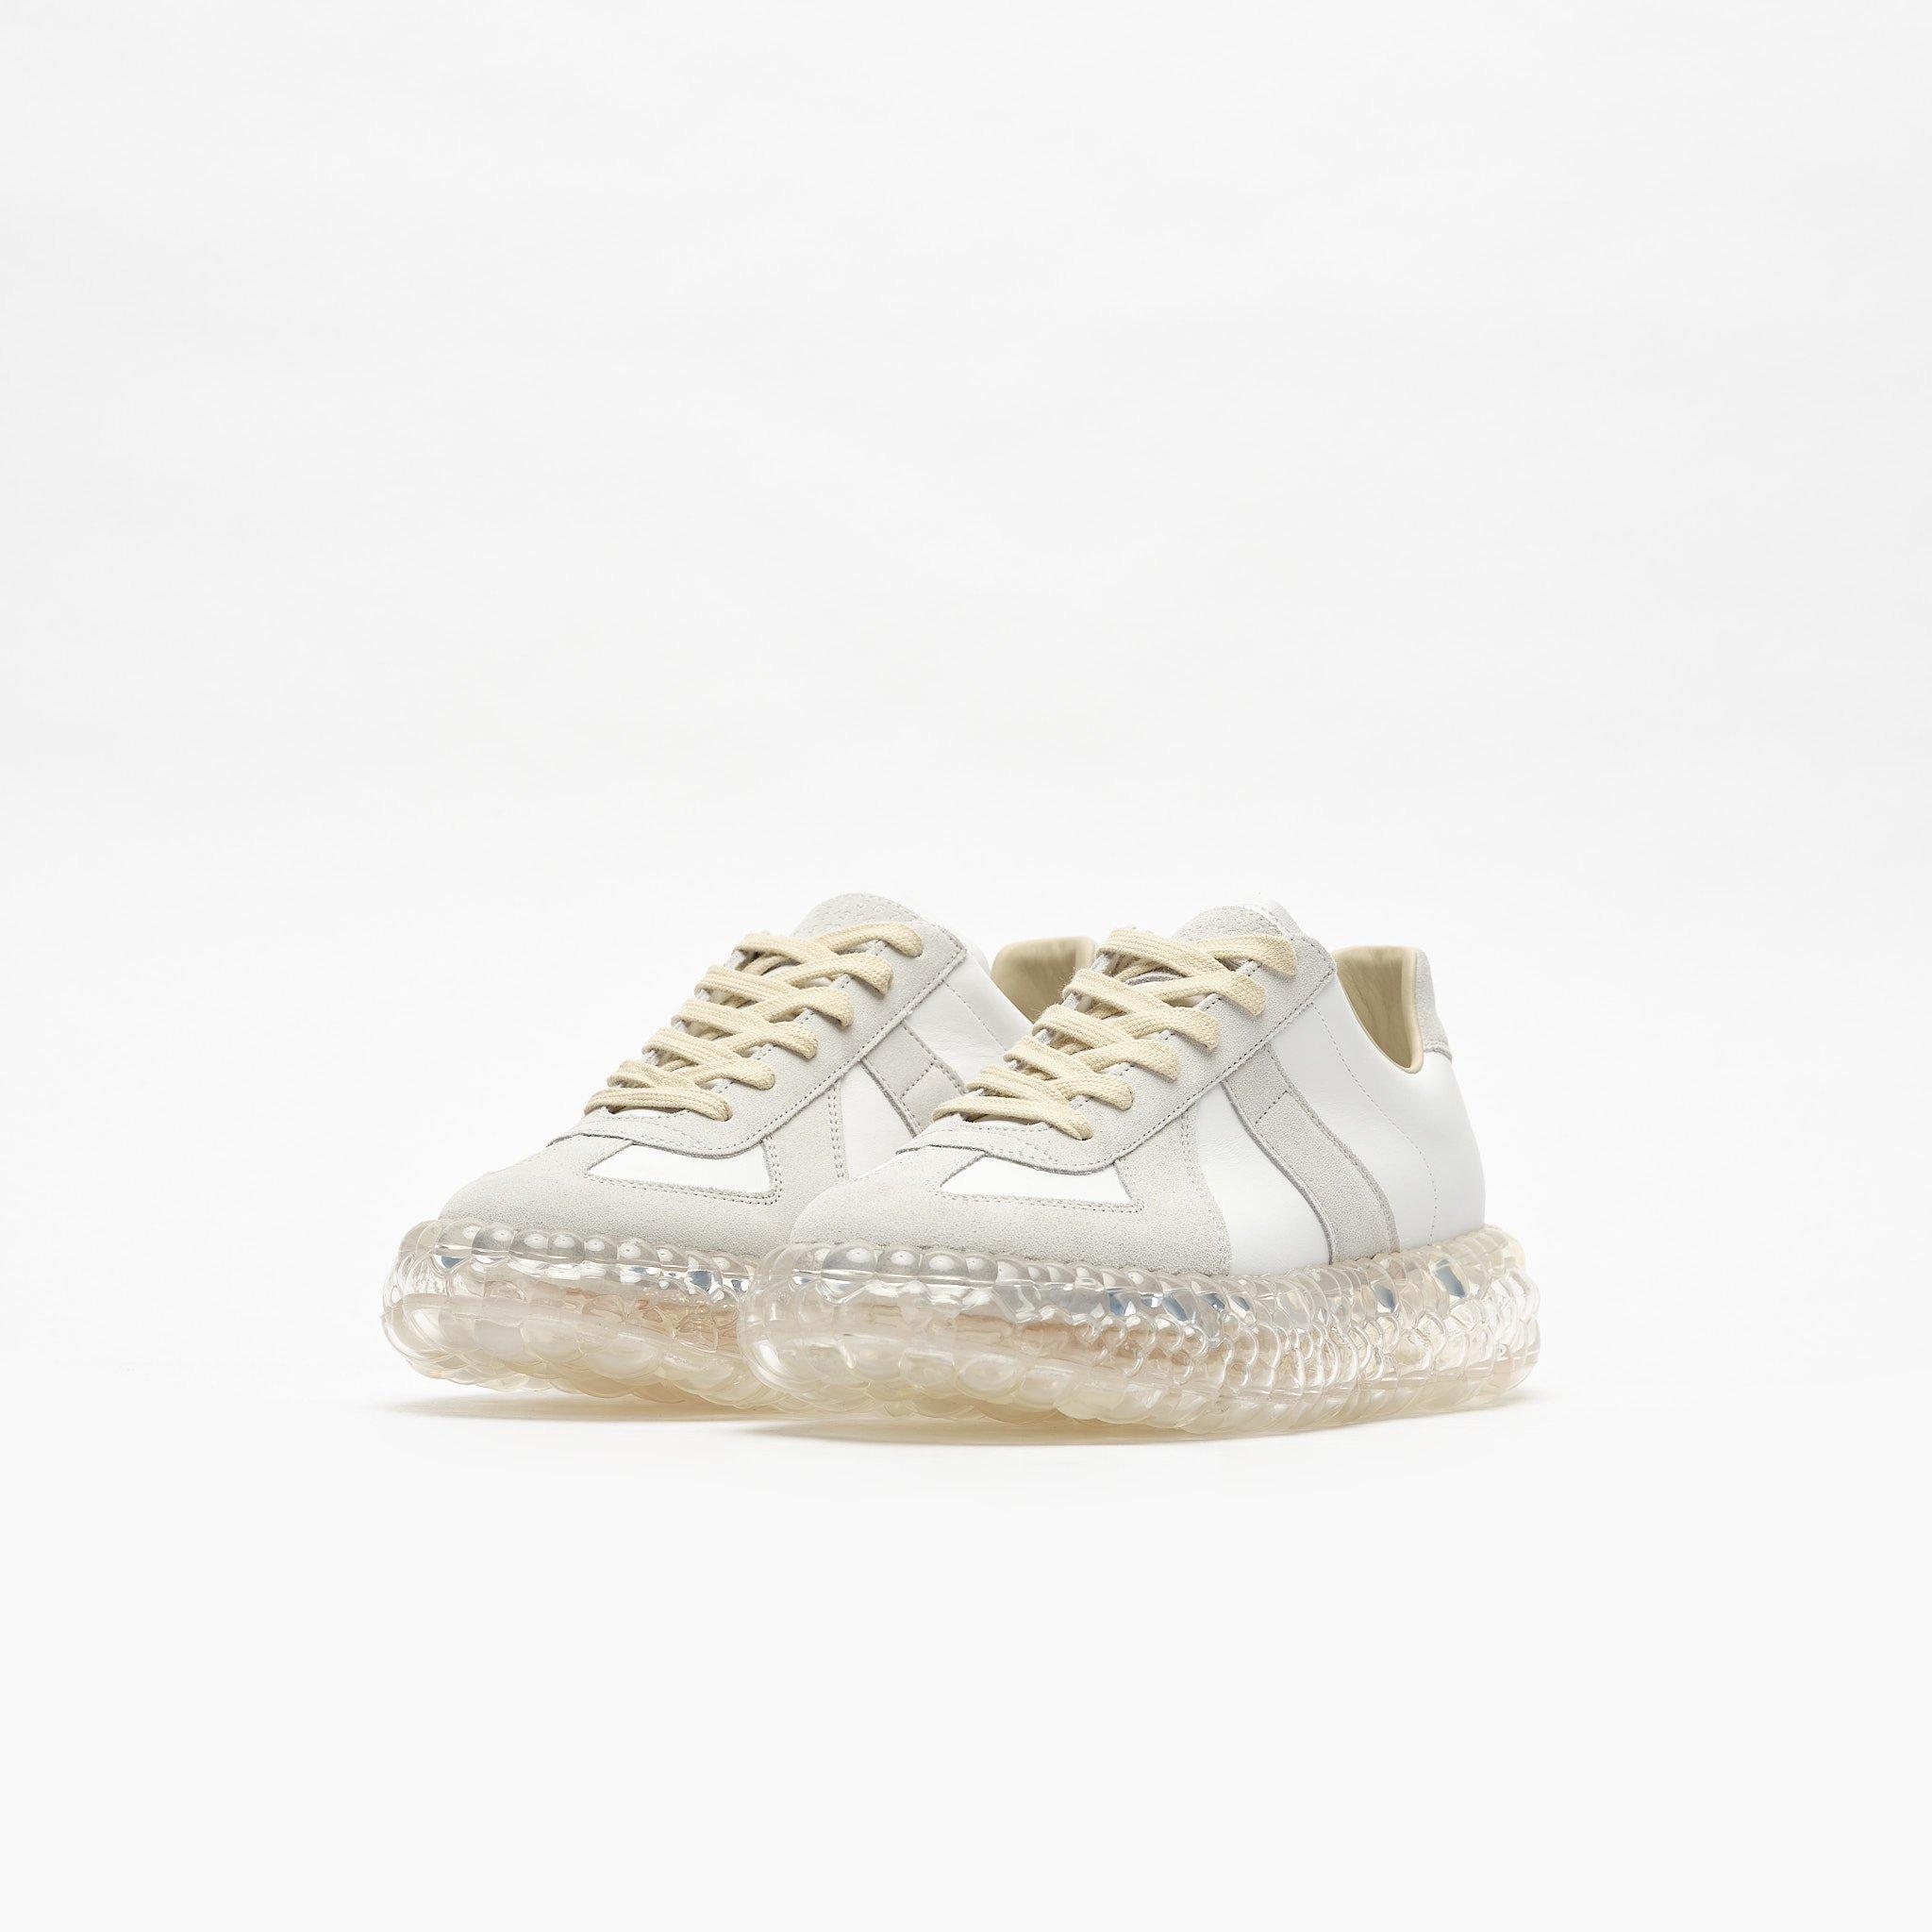 Maison Margiela Leather Bubble Sole Army Trainer in White for Men - Lyst